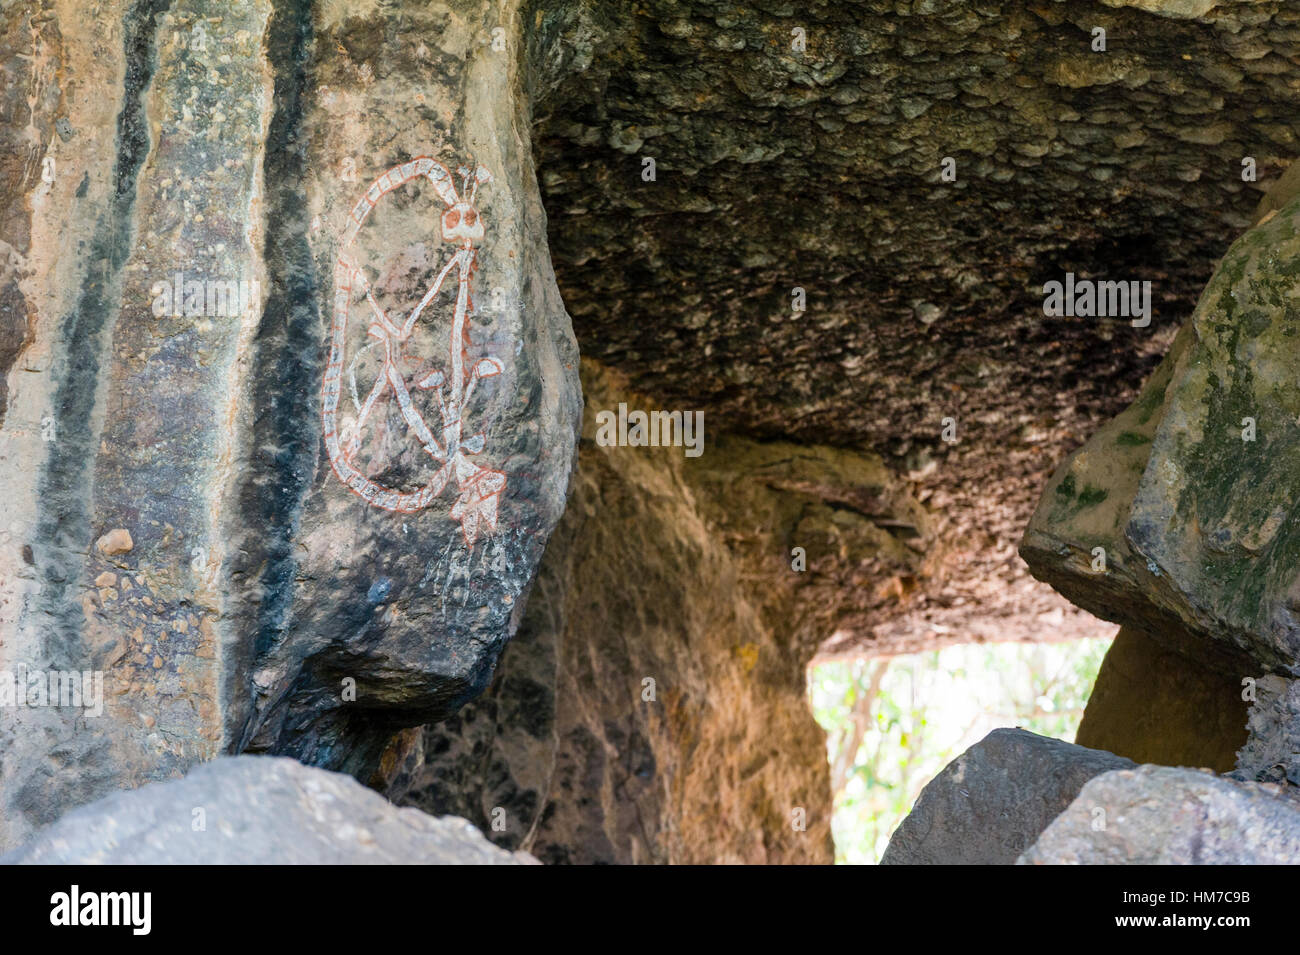 An ancient Aboriginal rock painting art gallery and cave. Stock Photo